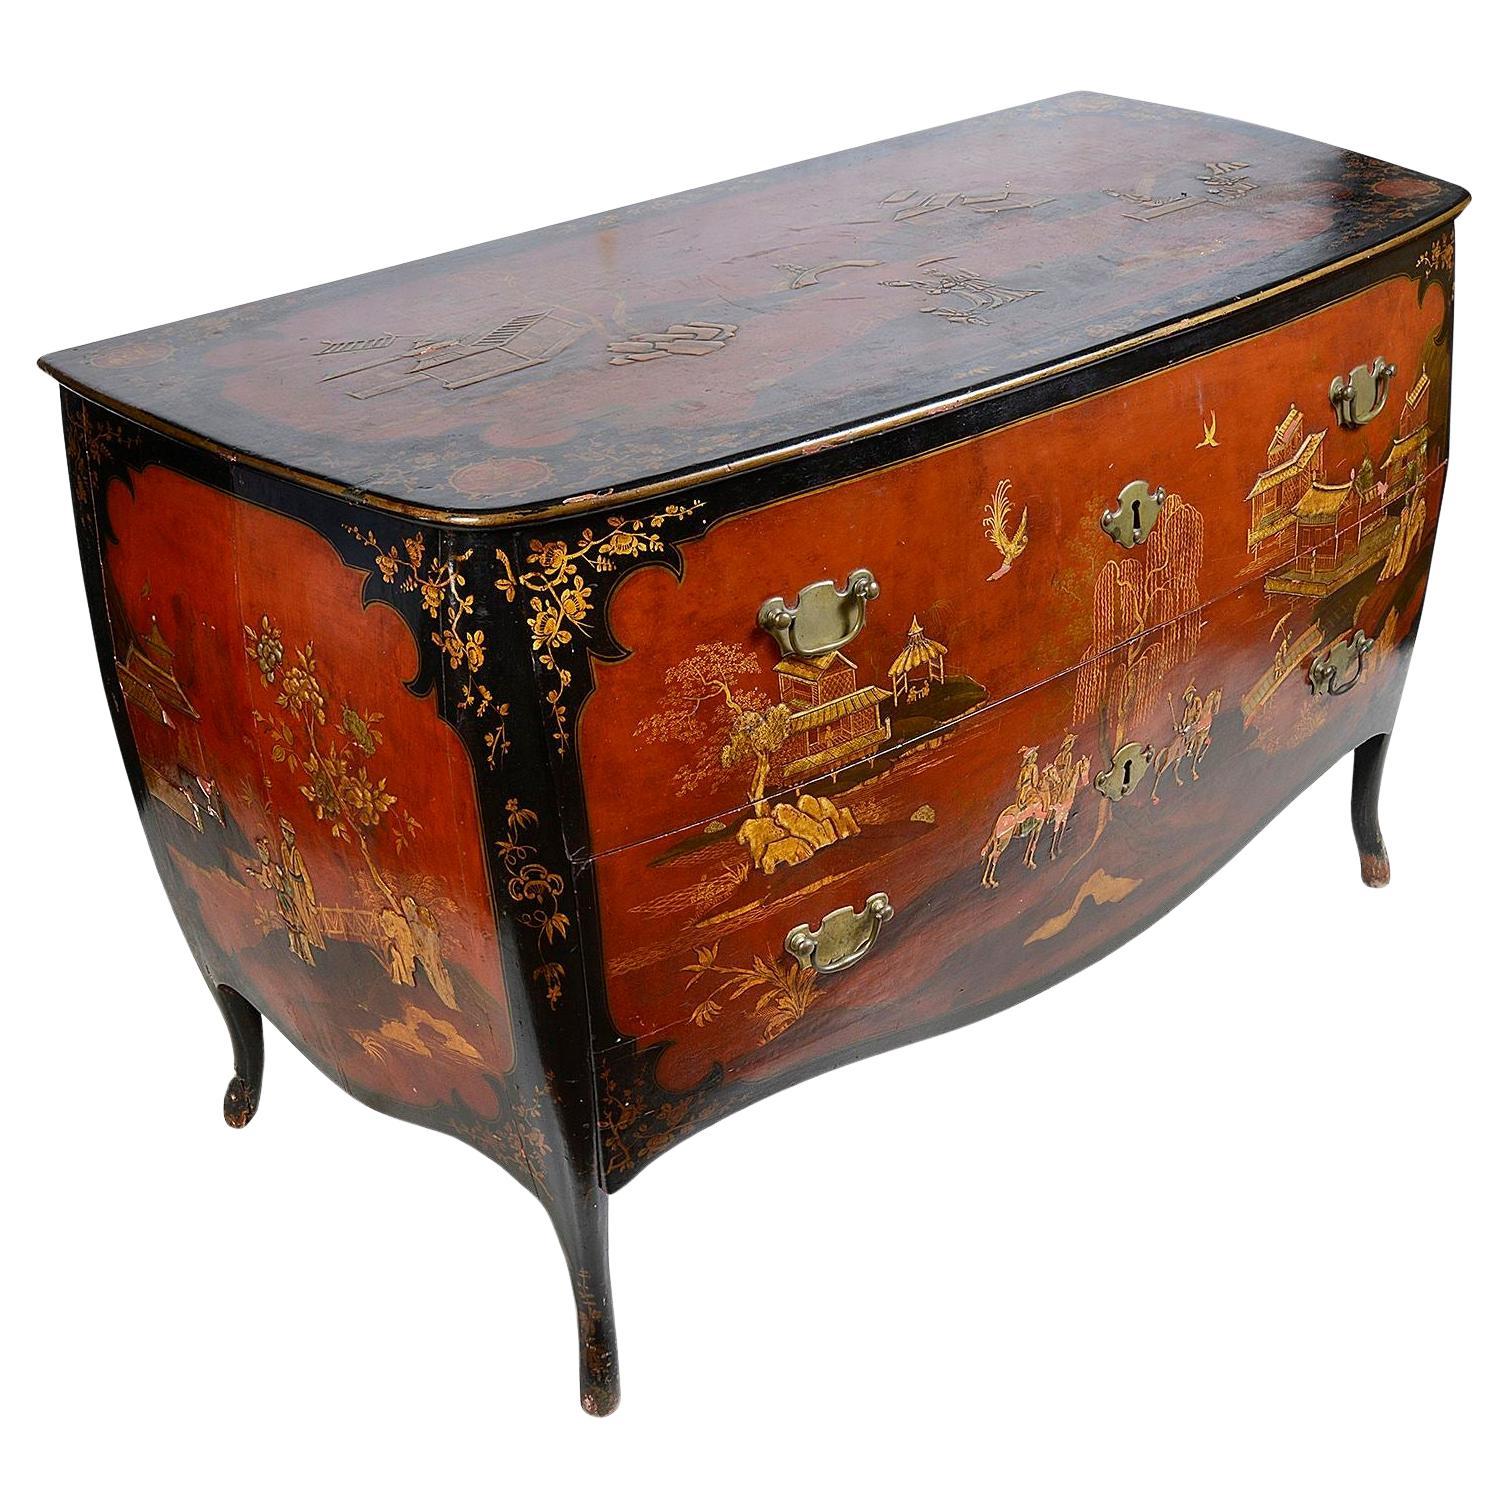 Chinoiserie lacquer commode, 18th Century Venetian style.